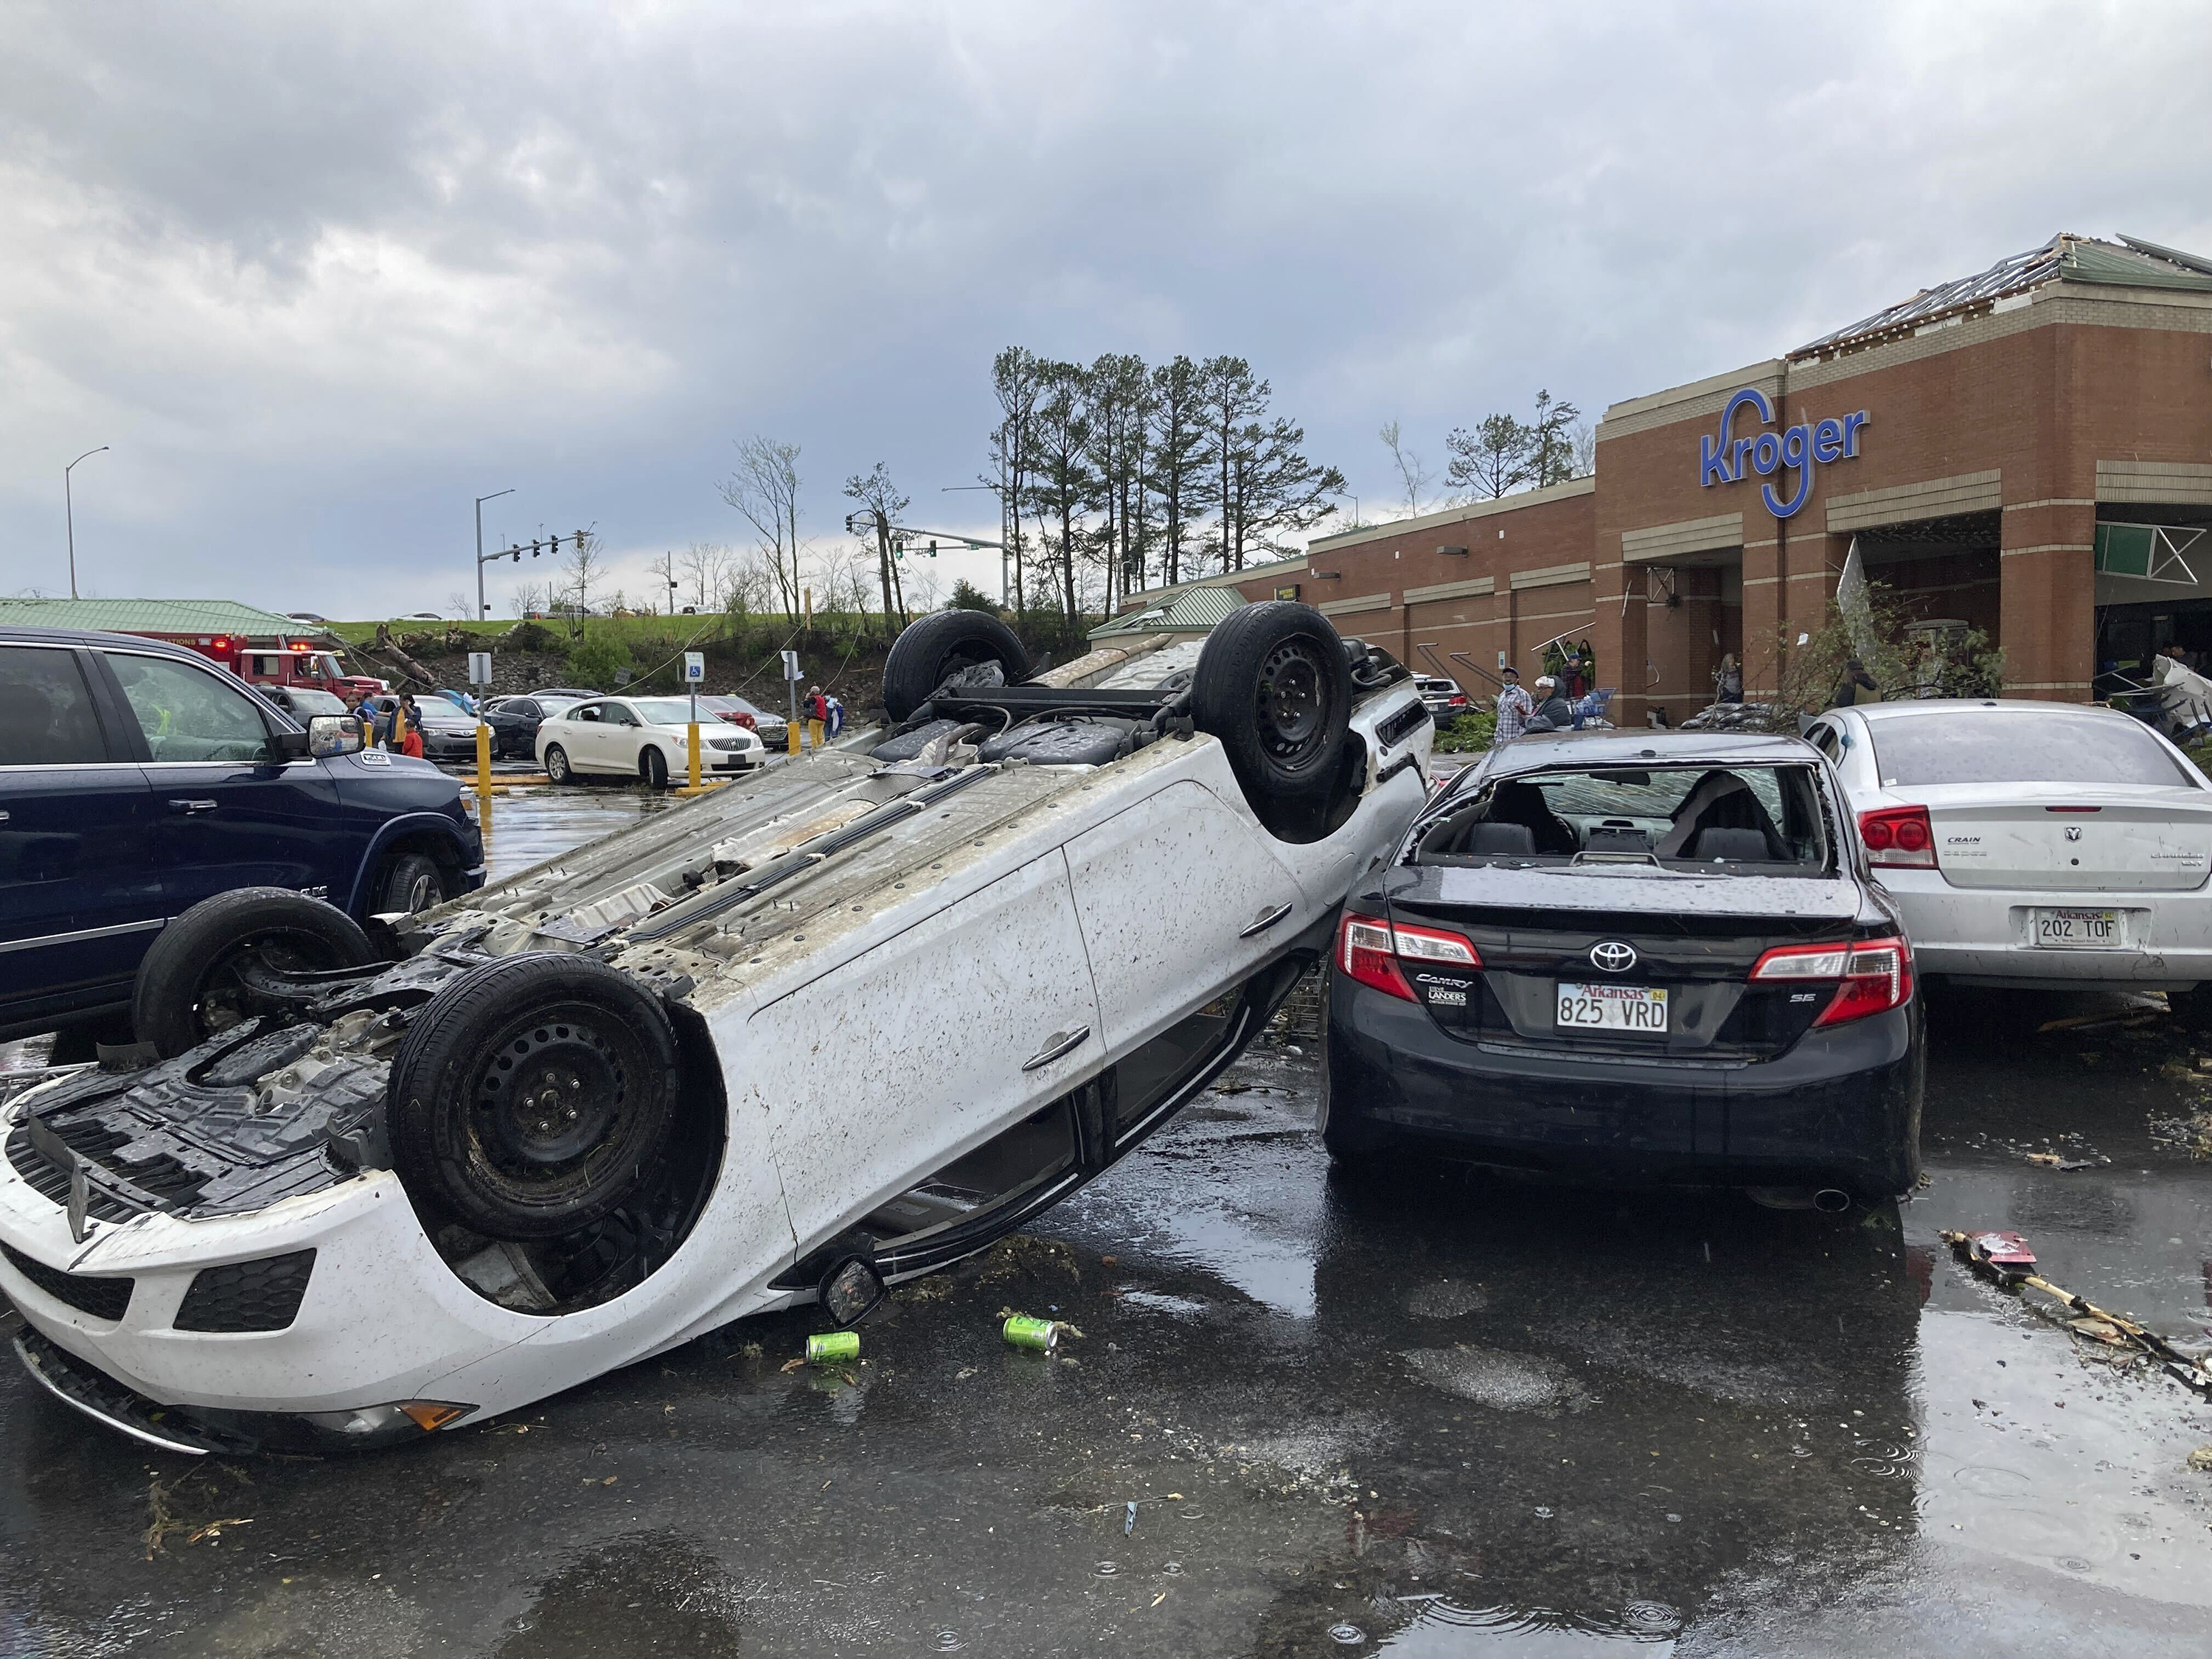 A car is upturned in a Kroger parking lot after a severe storm swept through Little Rock, Arkansas, Friday, March 31.